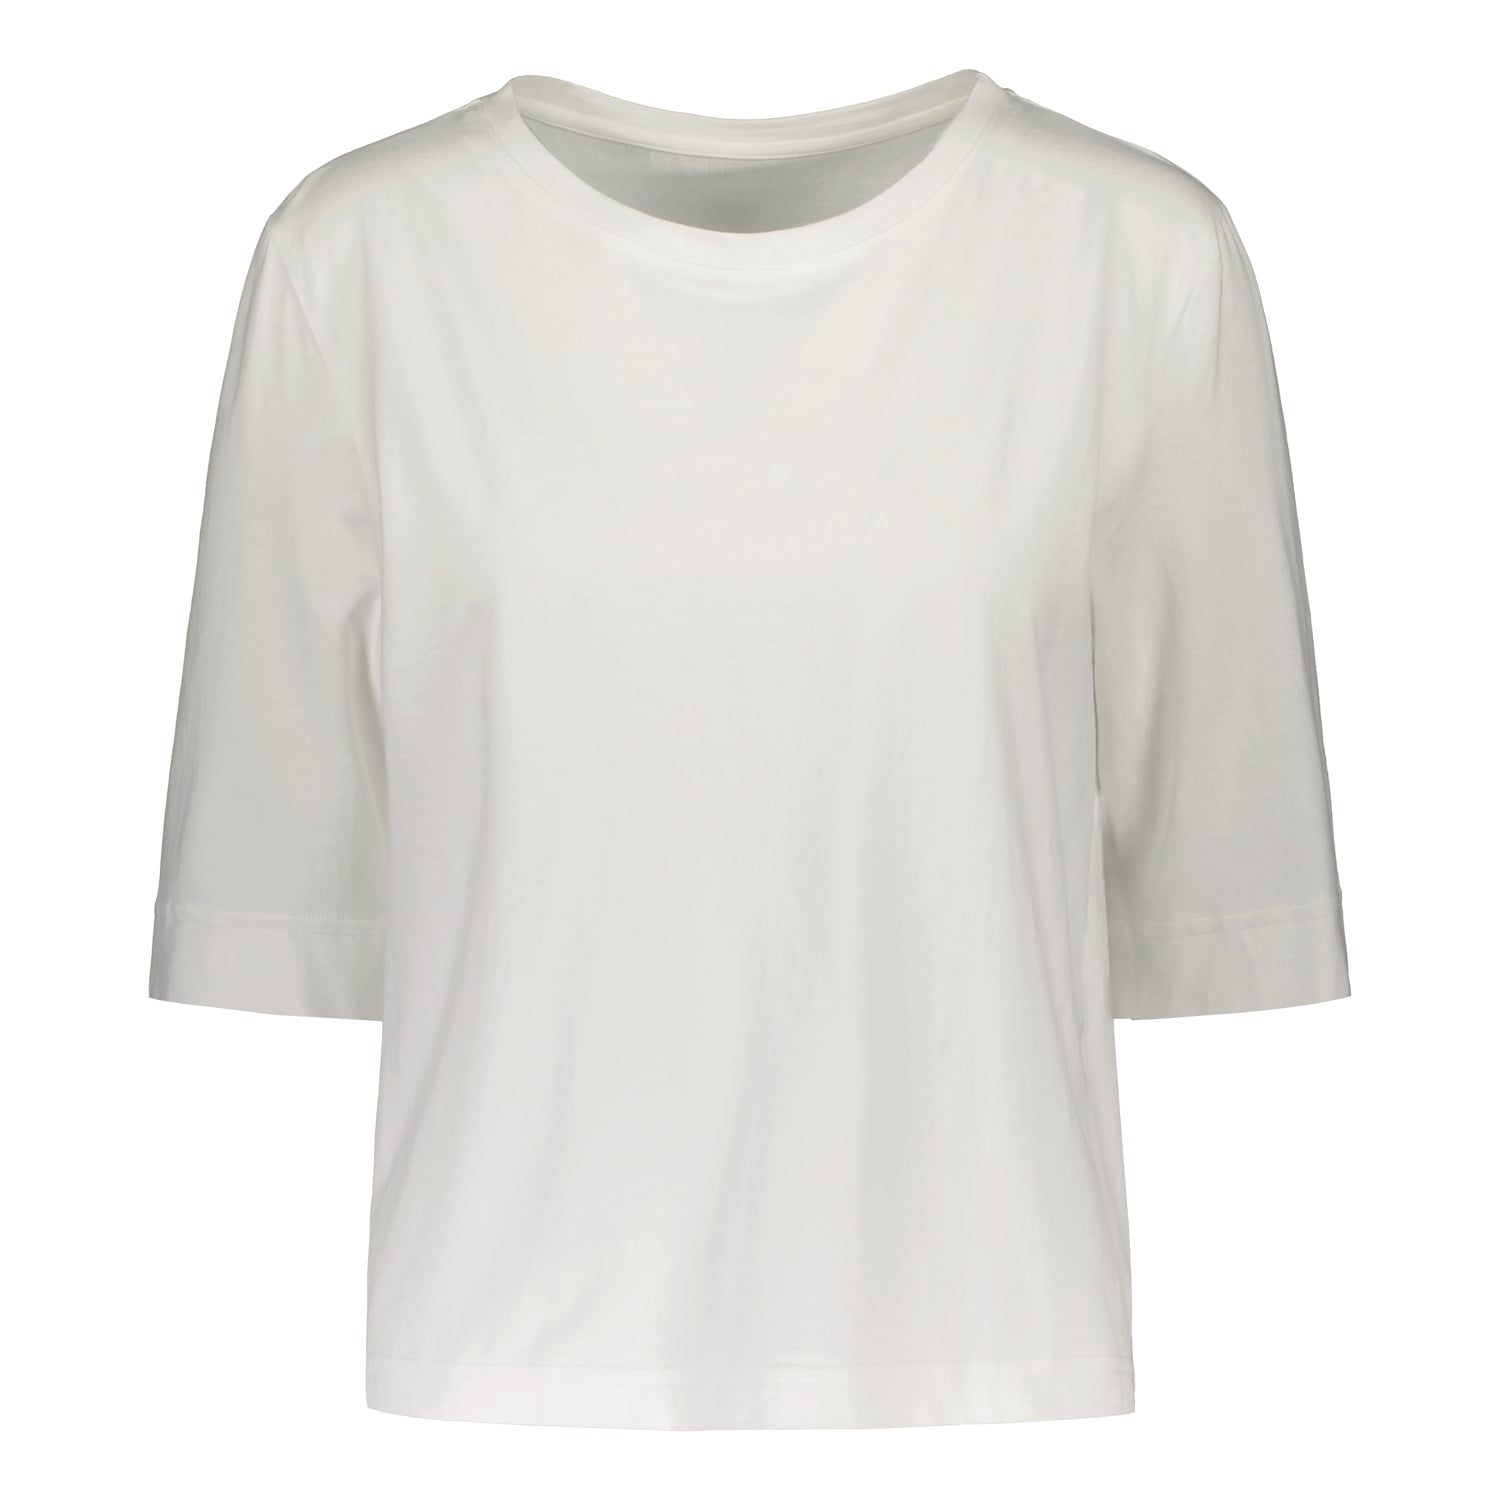 O-NECK T-SHIRT WITH LONG SLEEVE